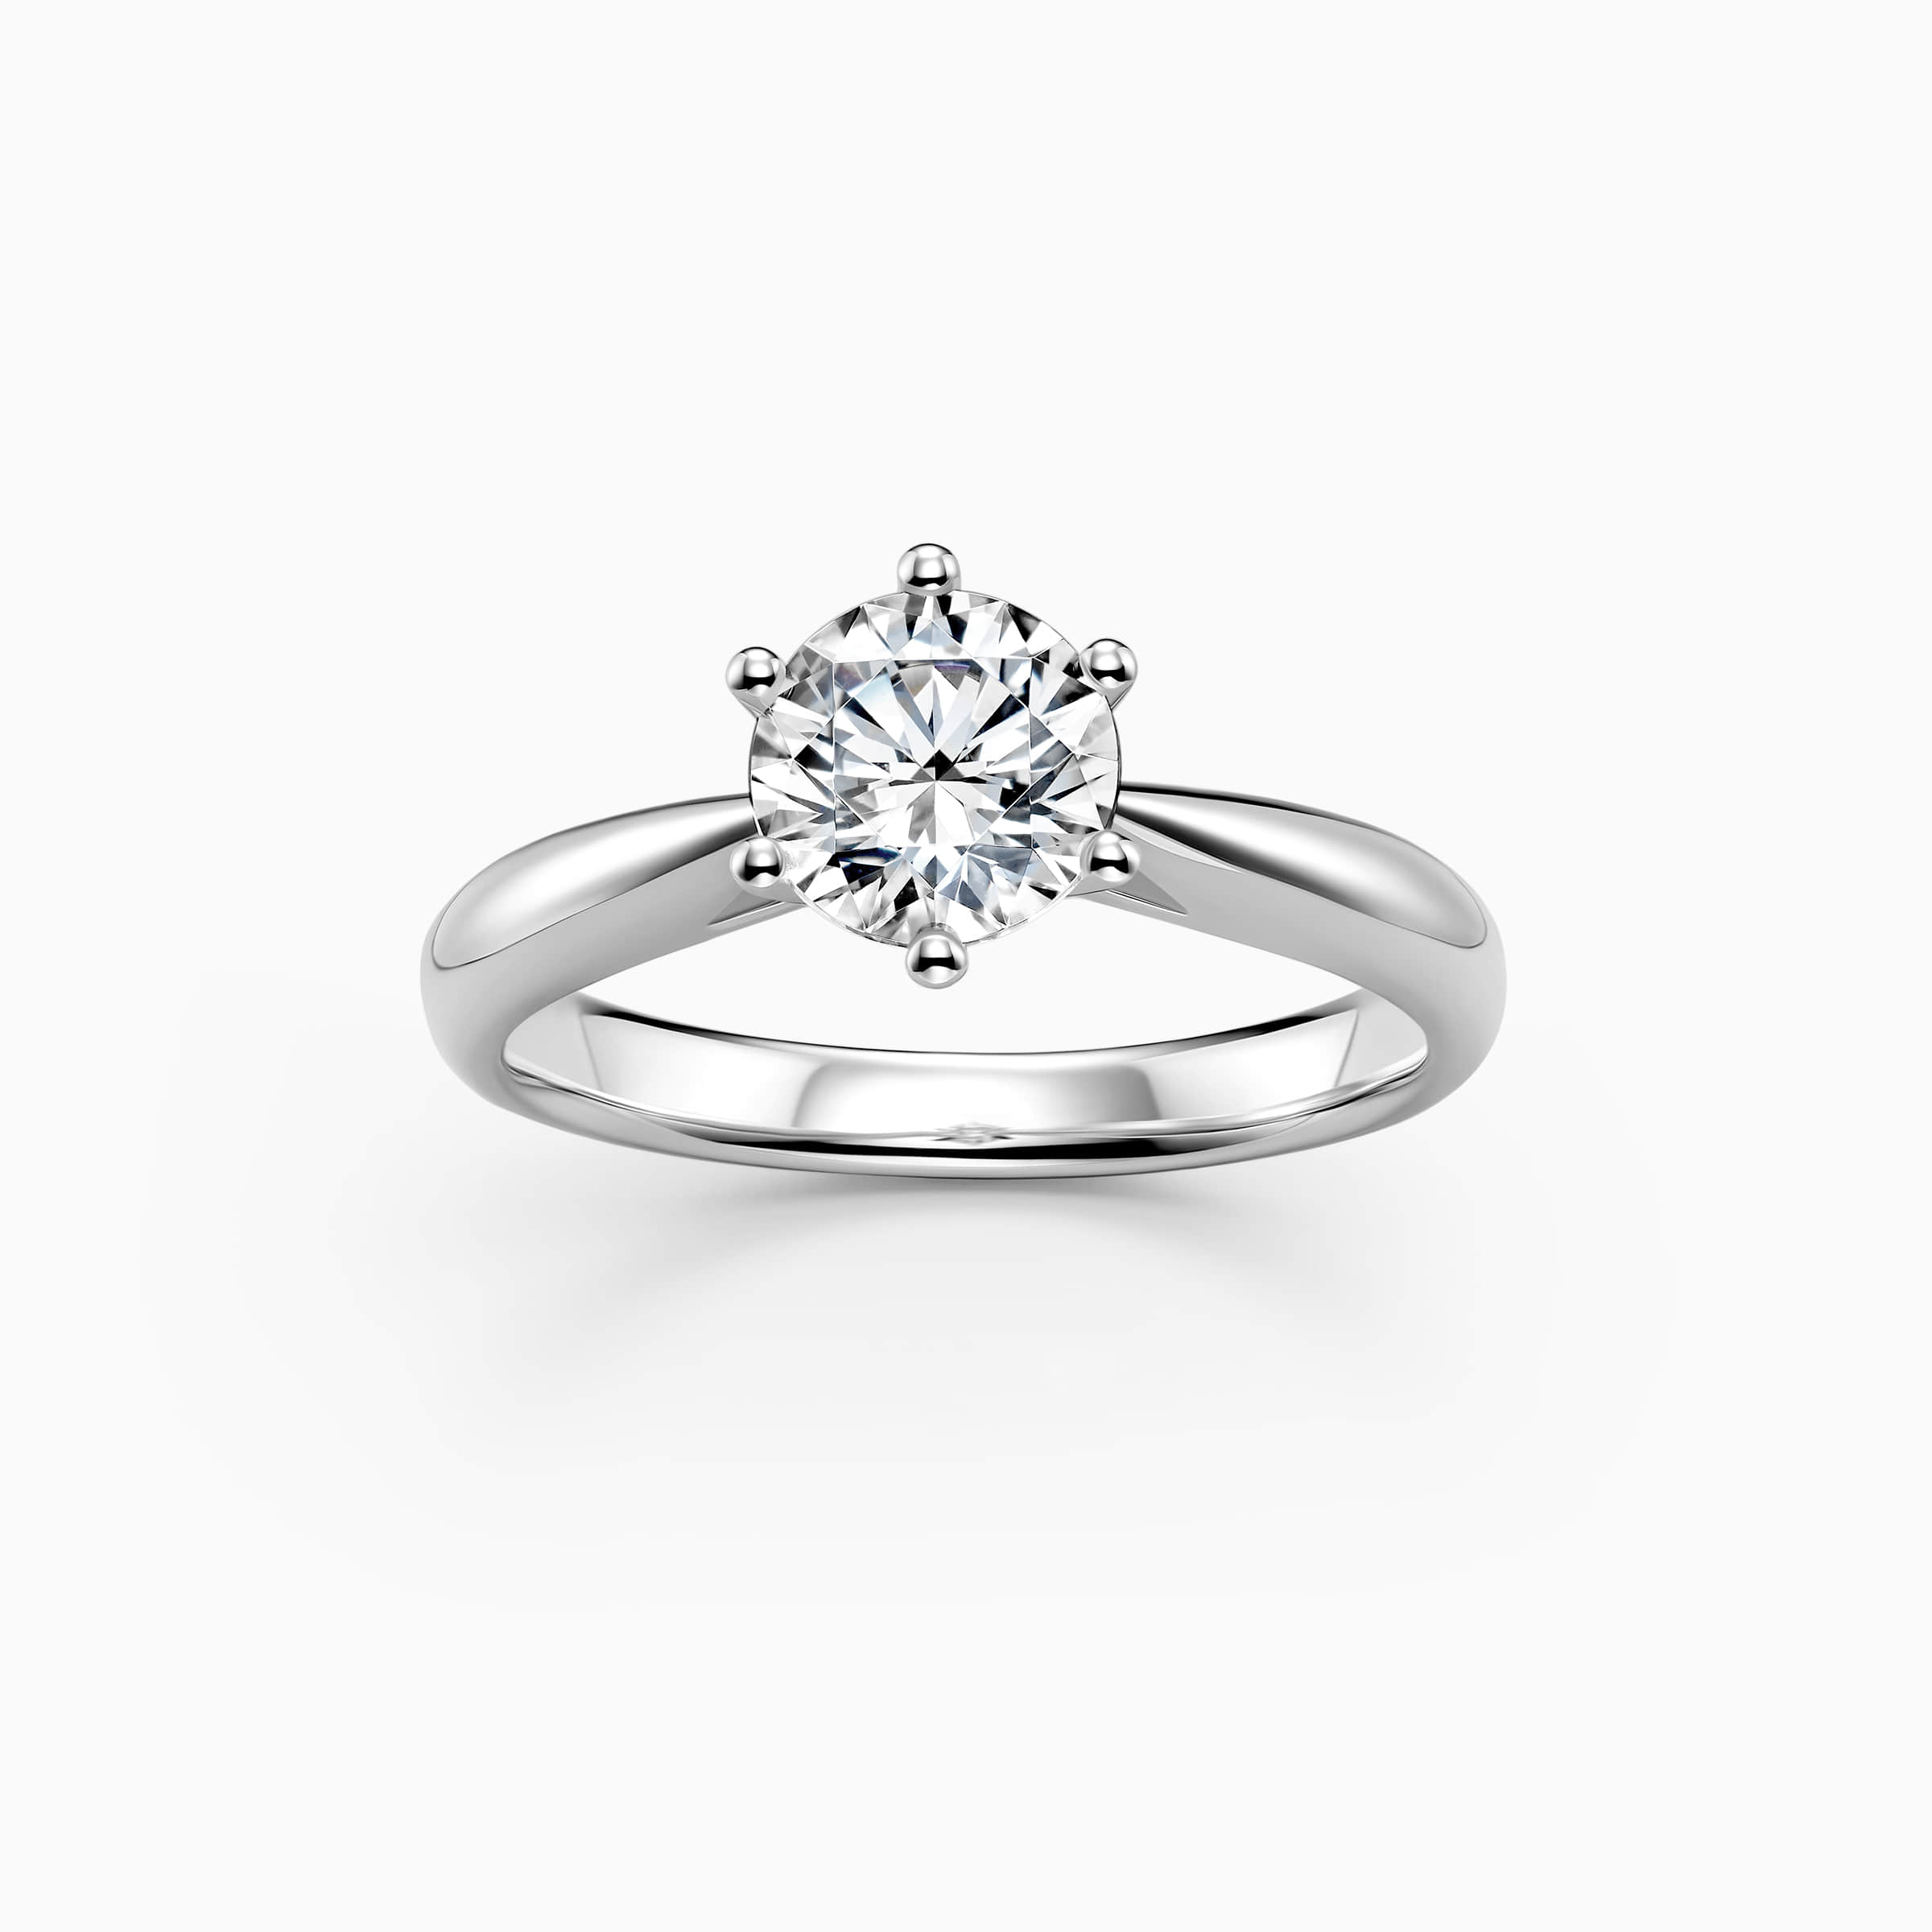 Darry Ring 6 prong solitaire engagement ring white gold